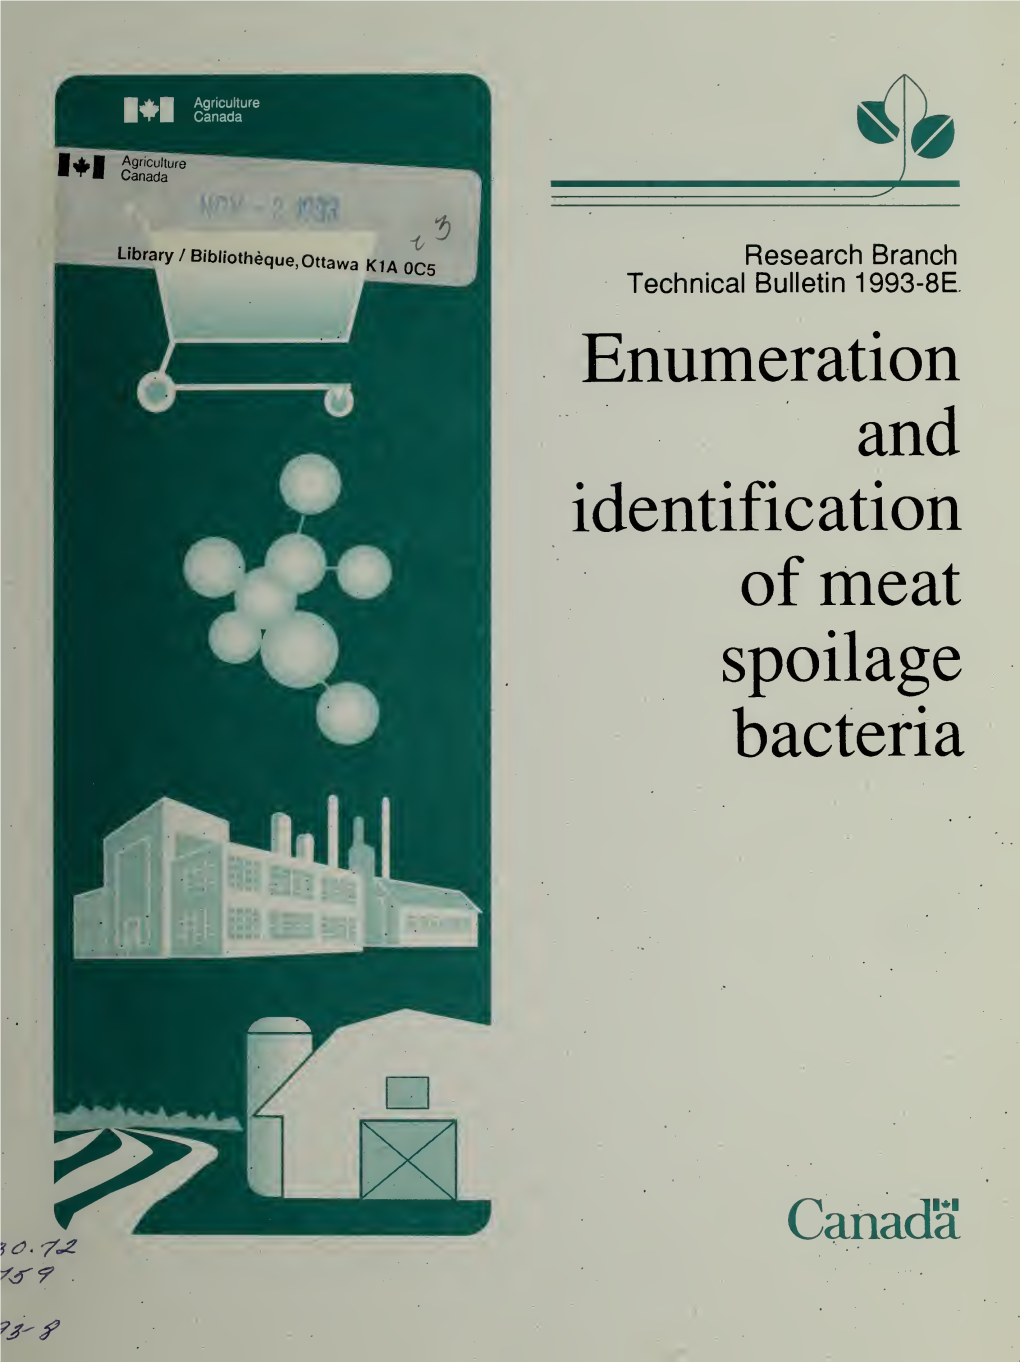 Enumeration and Identification of Meat Spoilage Bacteria